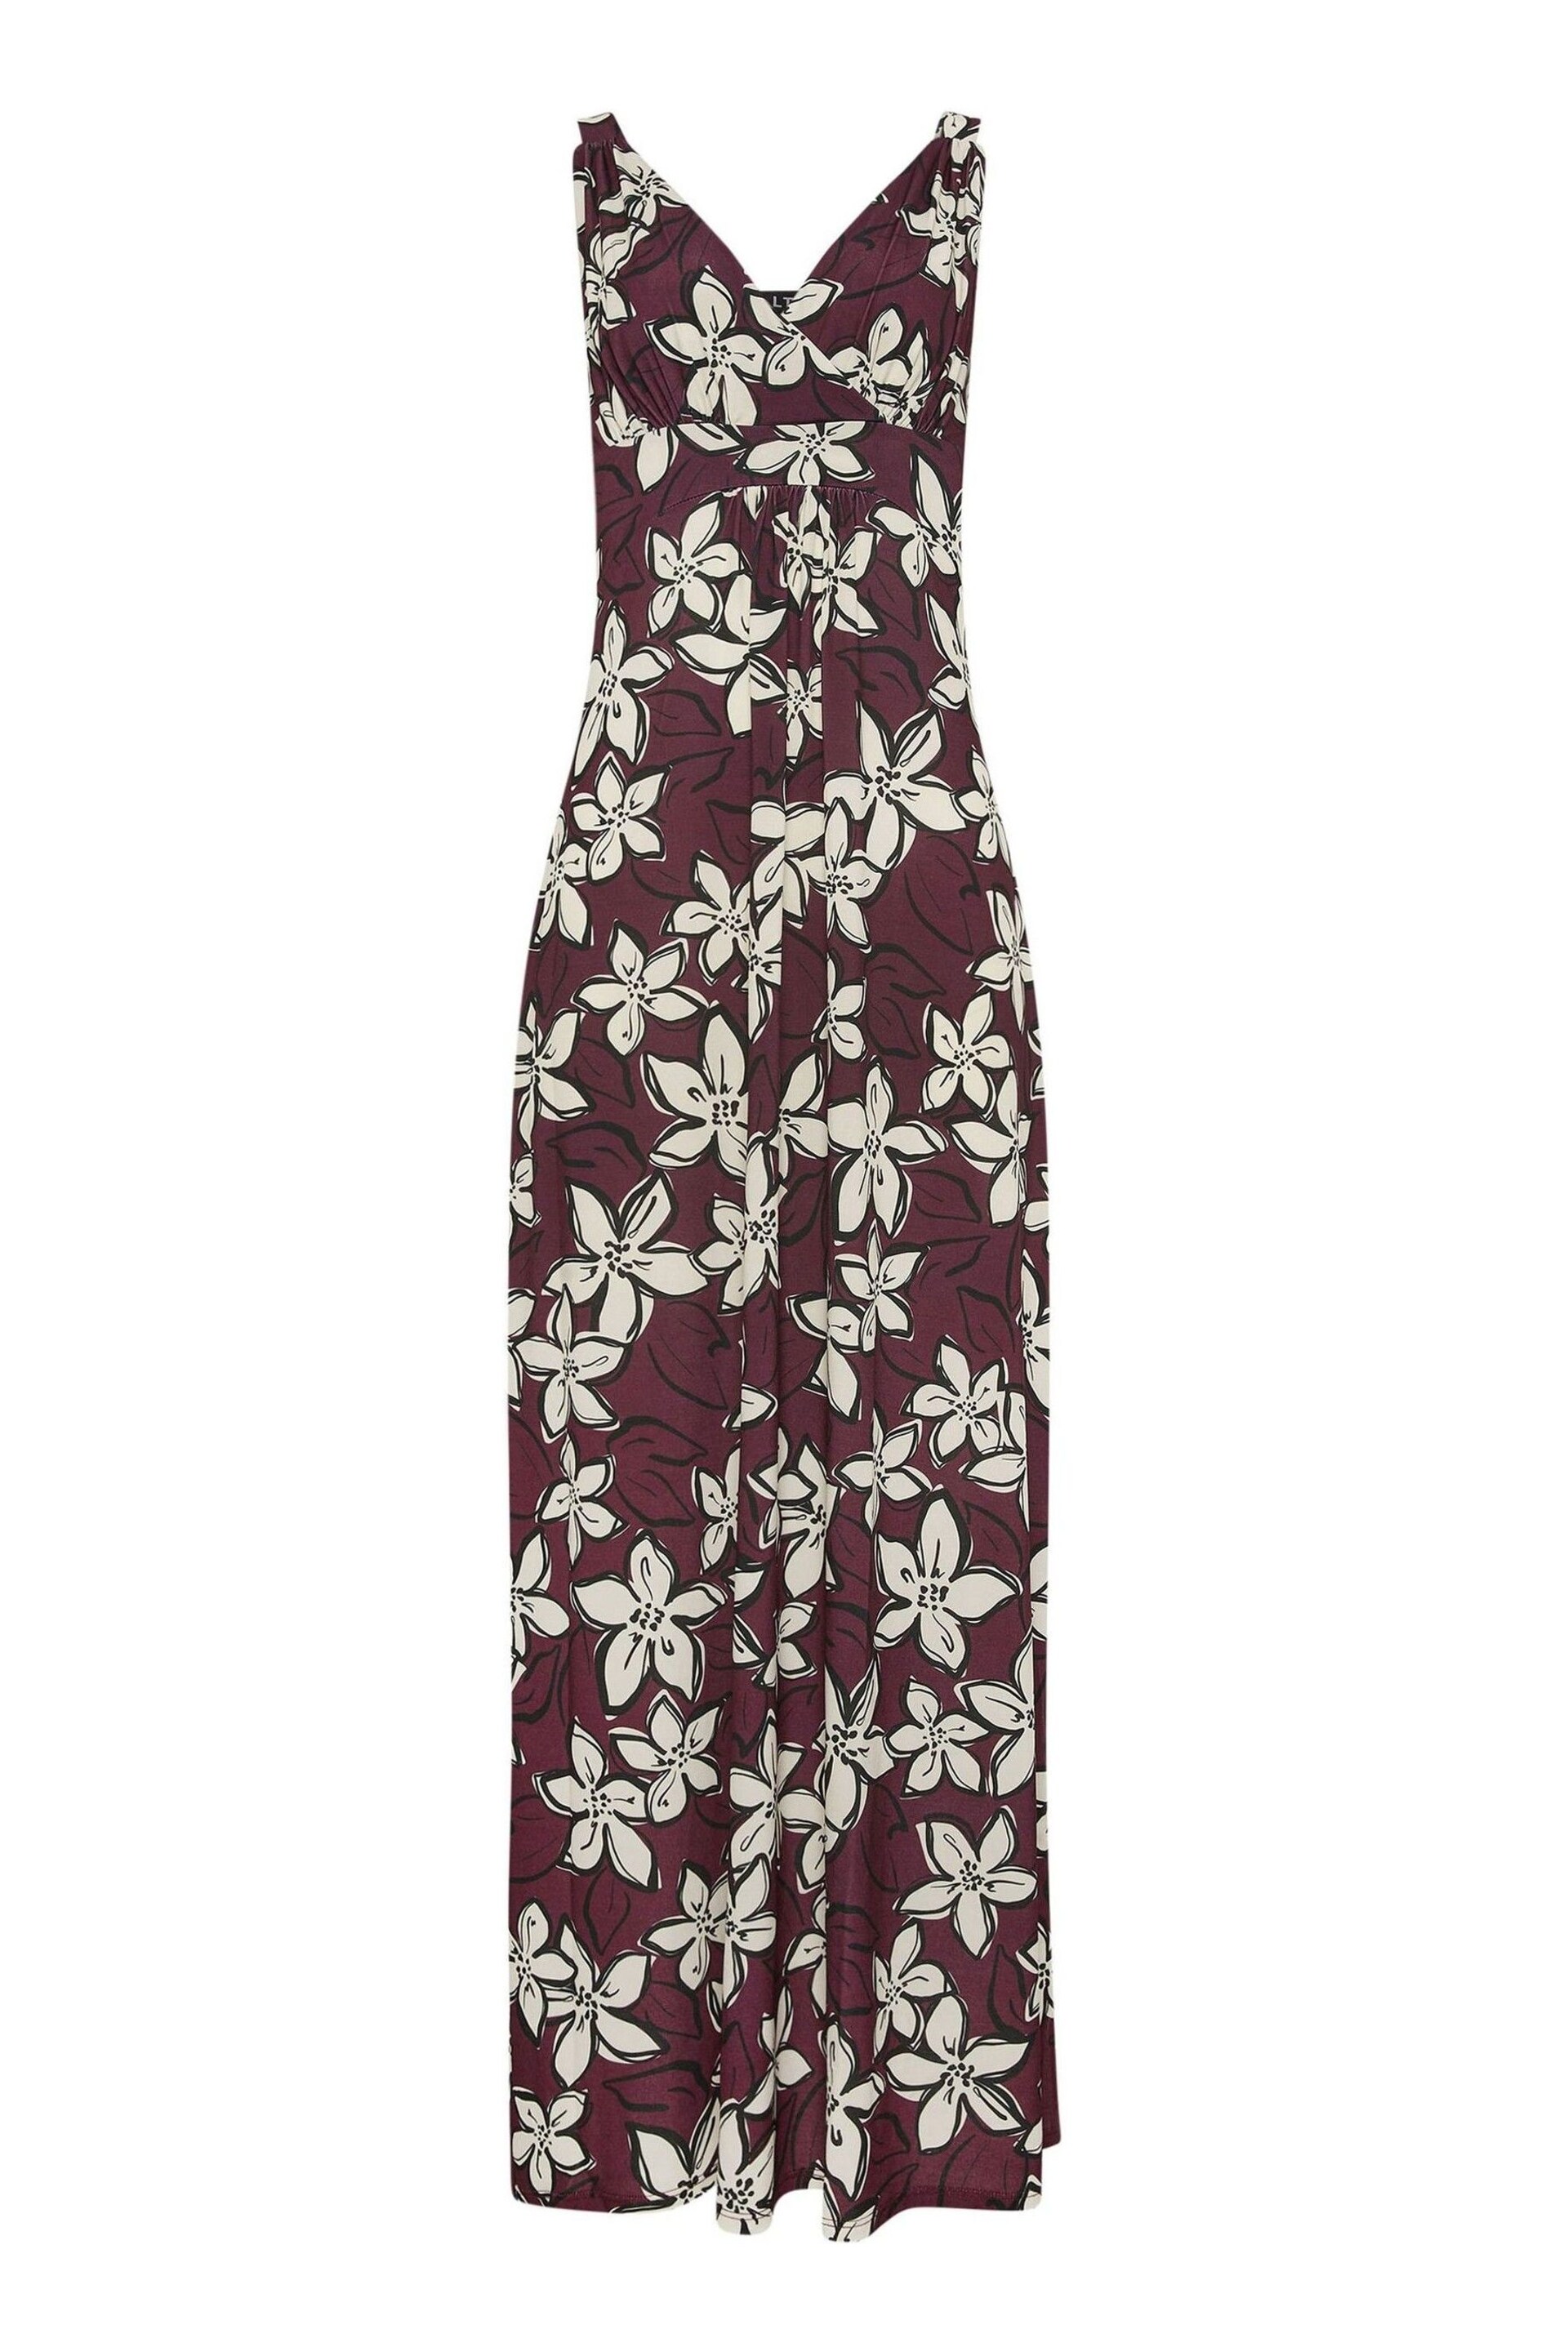 Long Tall Sally Red LTS Tall Wine Red Floral Print Maxi Dress - Image 5 of 5